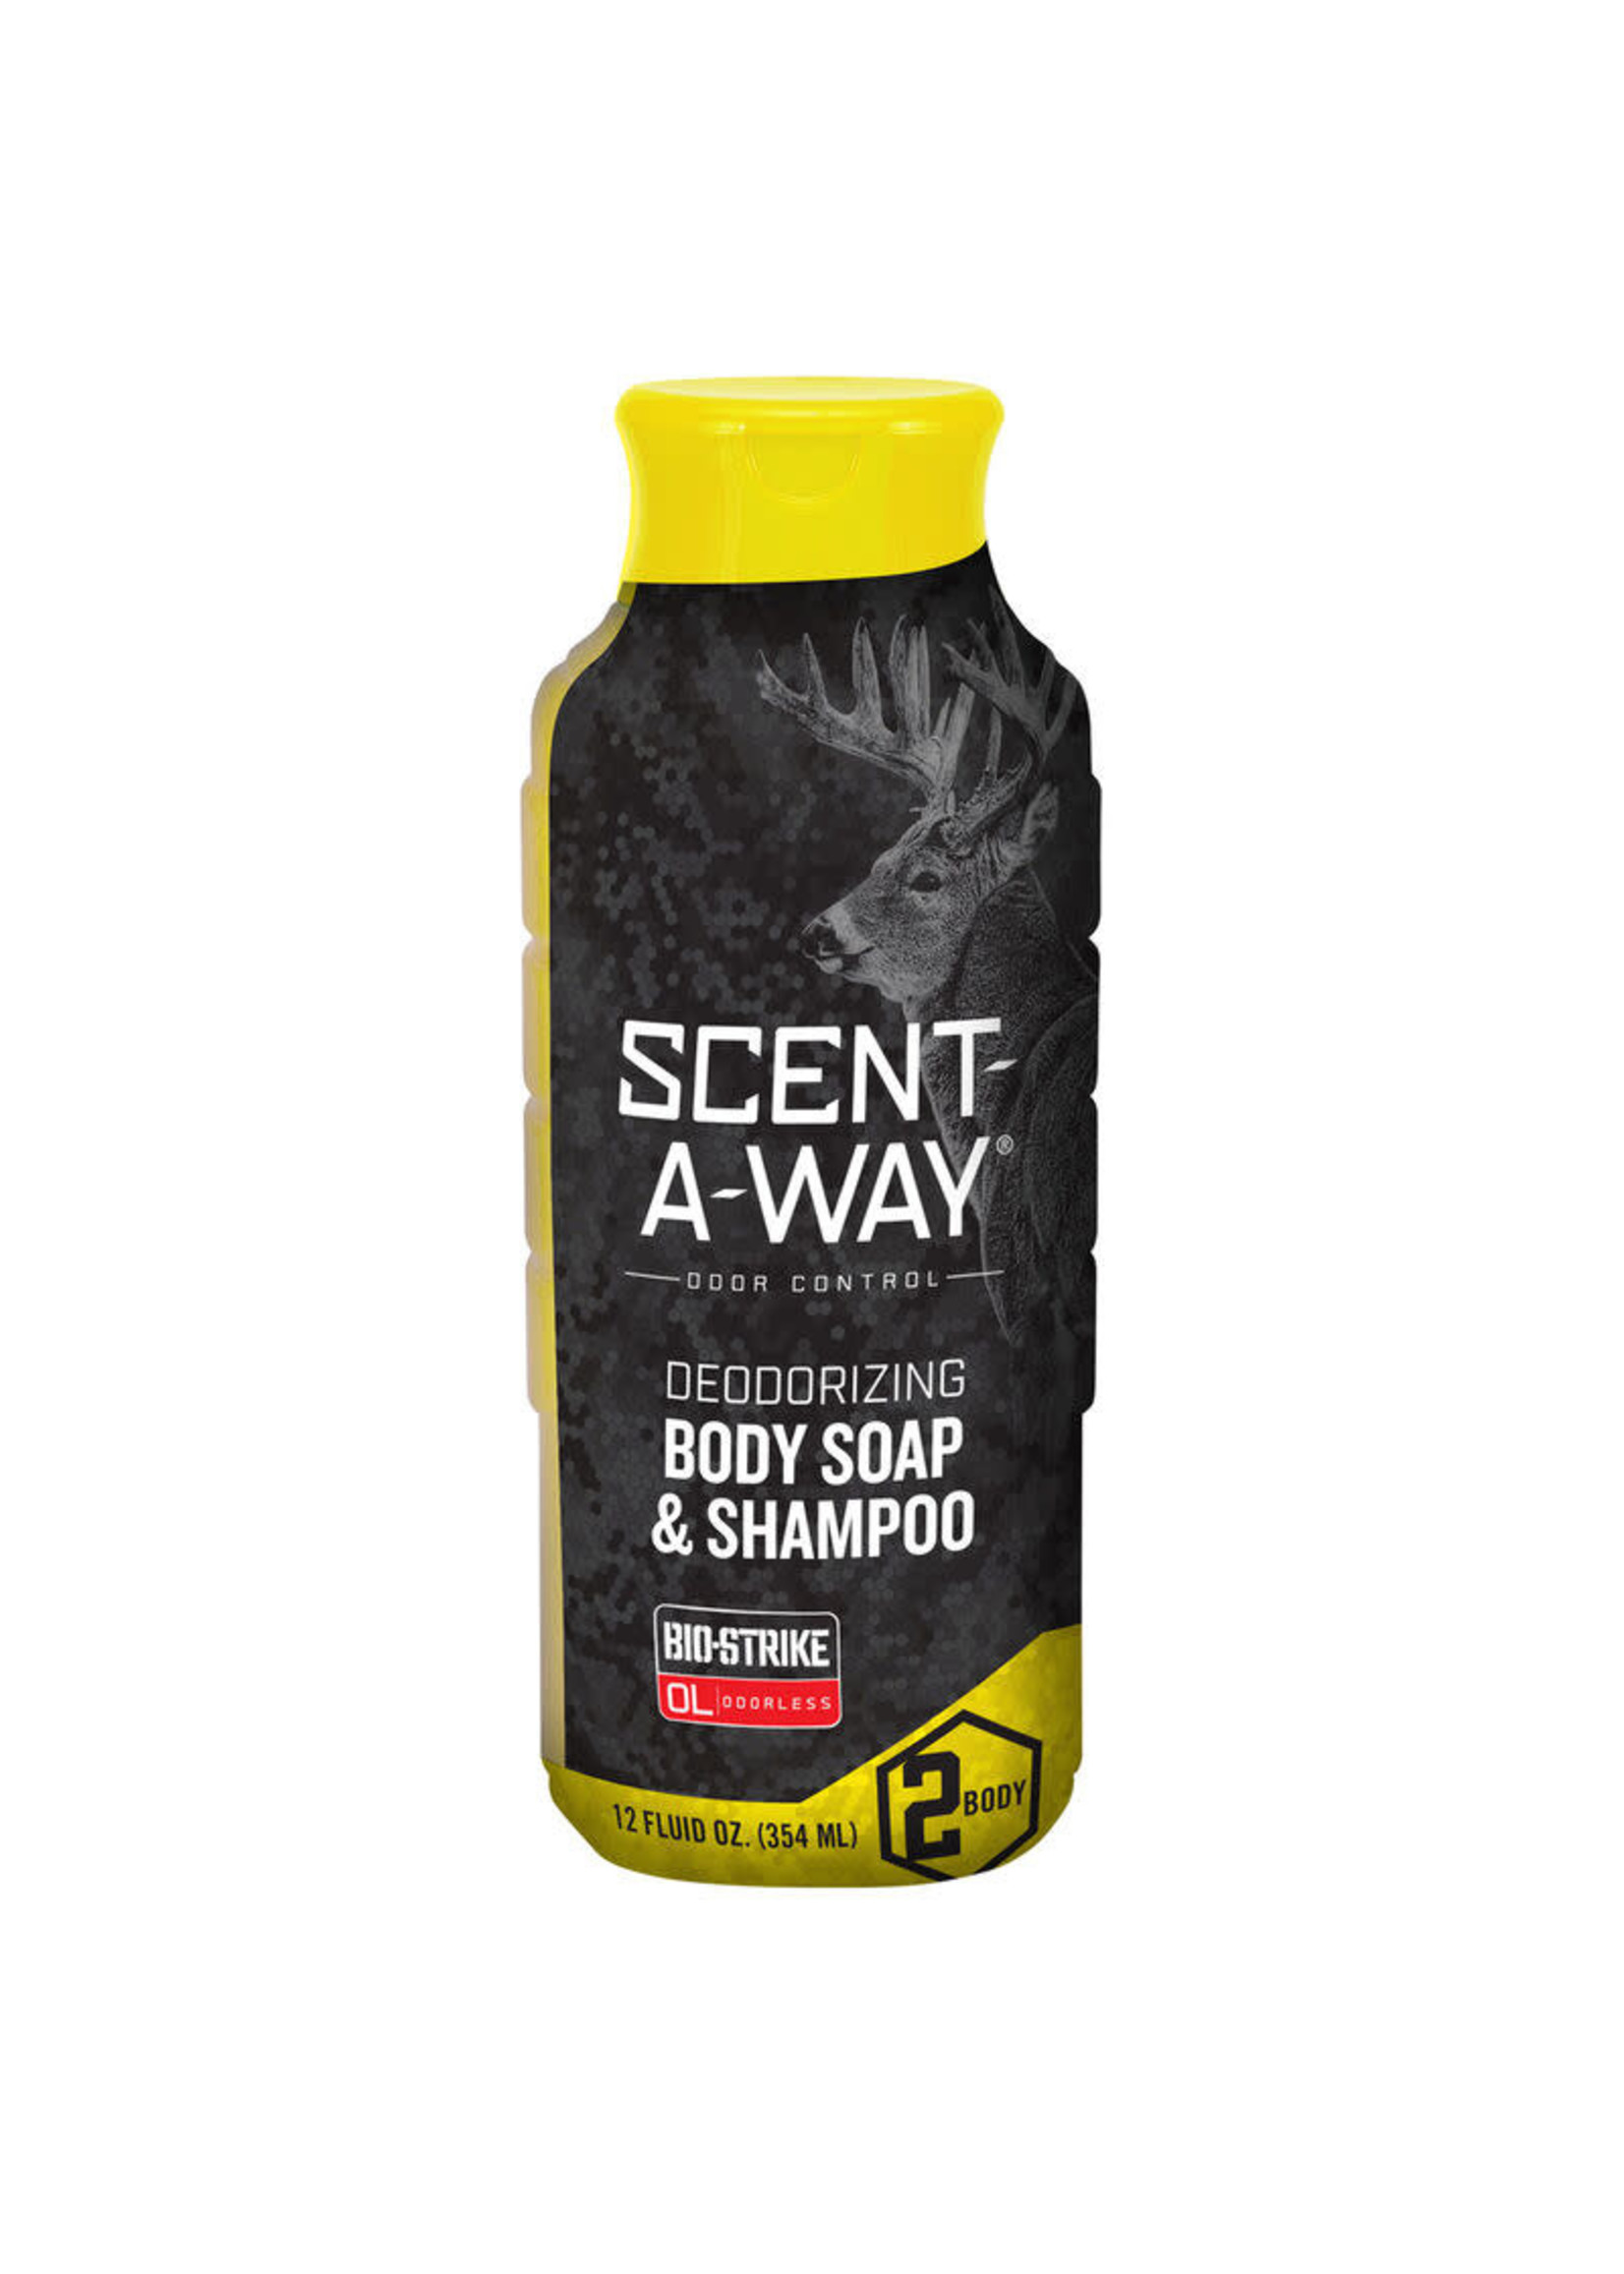 Hunters Specialties scent-a-way body soap and shampoo odorless